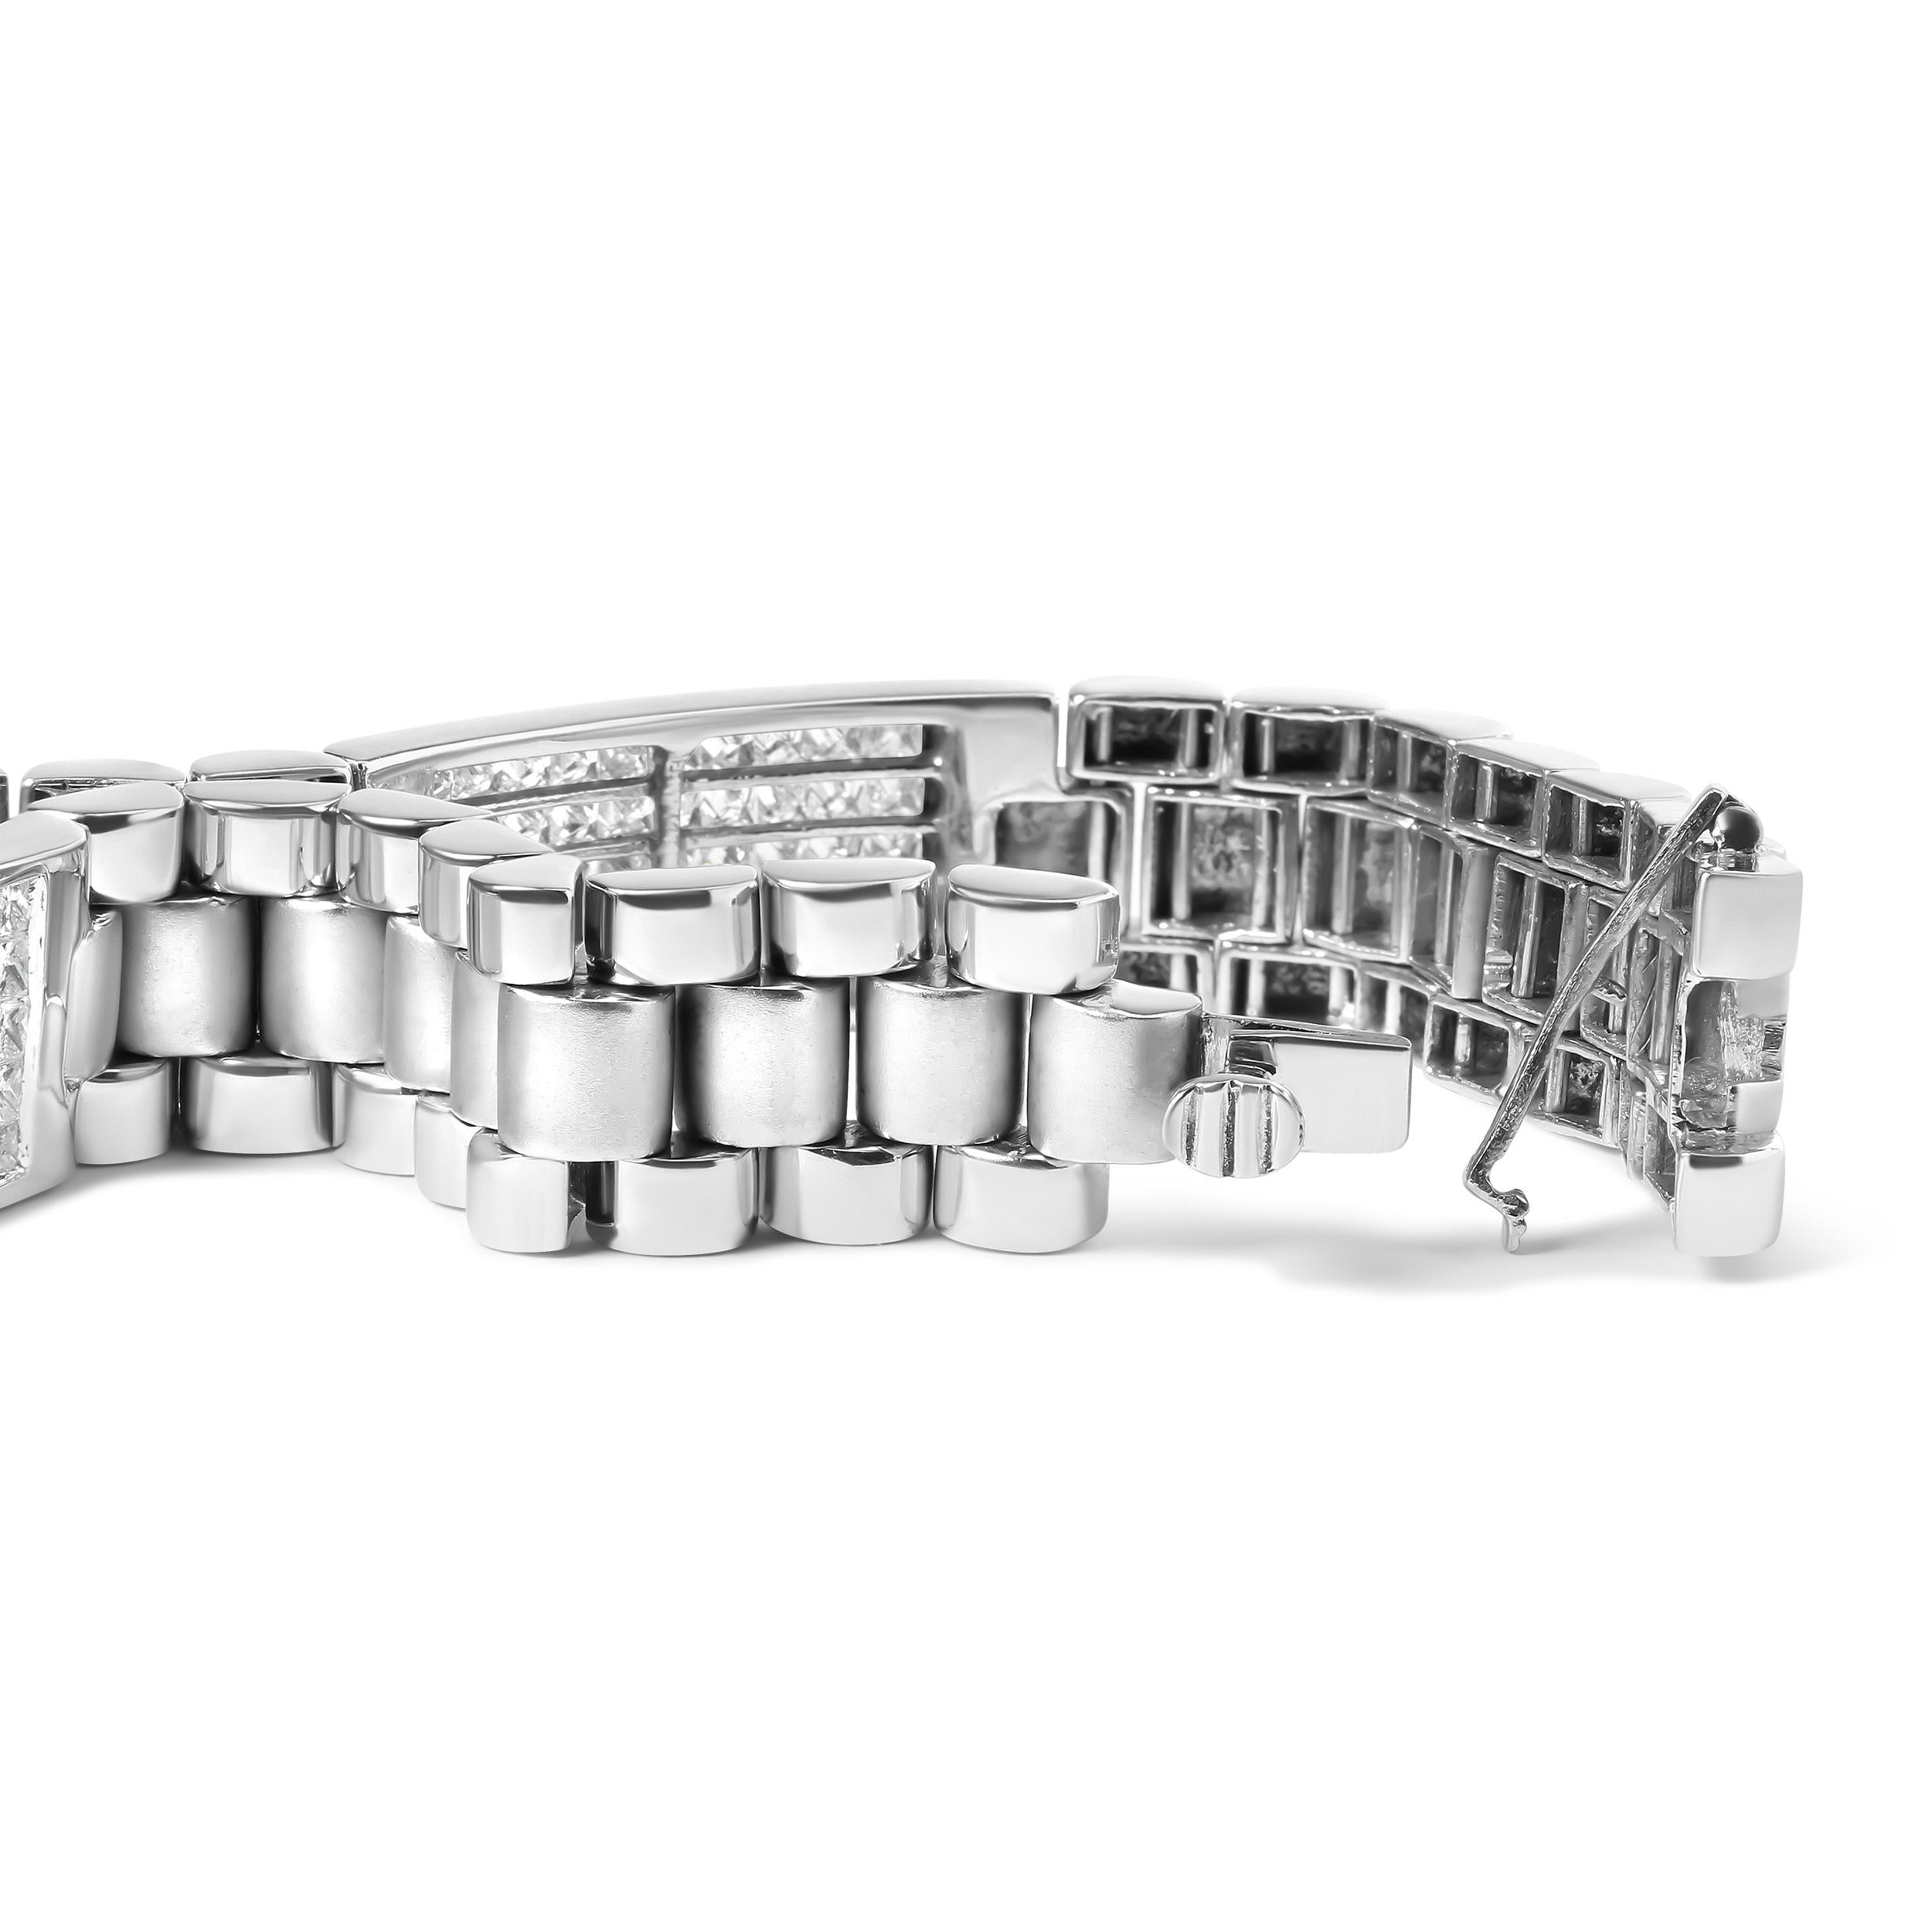 This elegant and sophisticated 14K white gold bracelet is the perfect accessory for any stylish man. The identification plate bracelet features a total diamond weight of 12 carats, with a total of 185 princess cut diamonds creating a stunning and